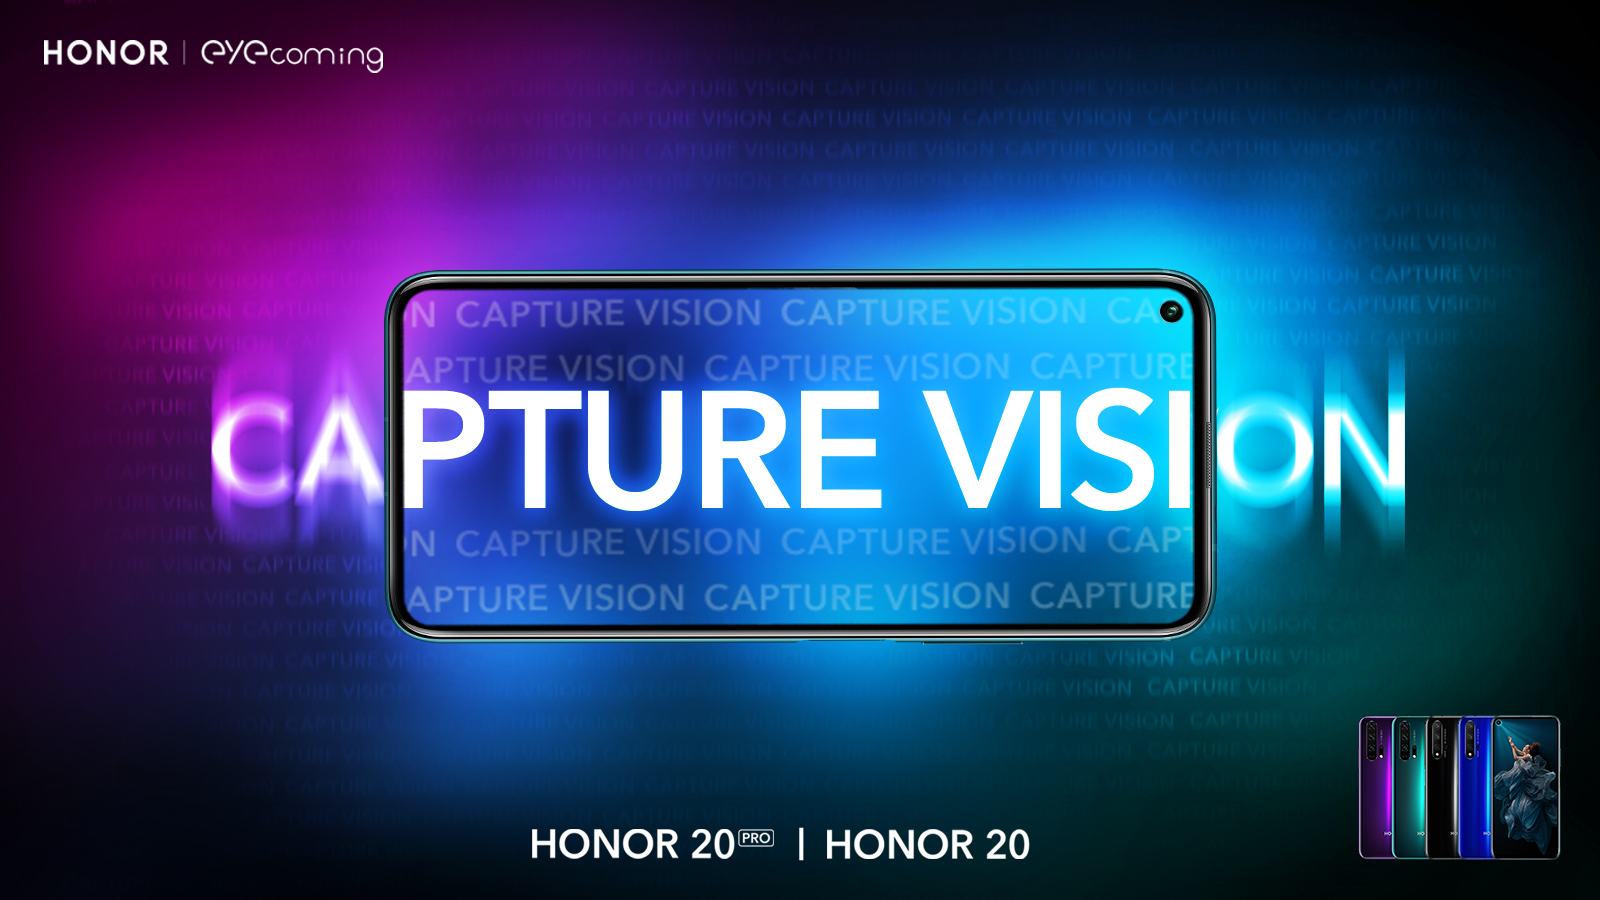 HONOR Capture Vision